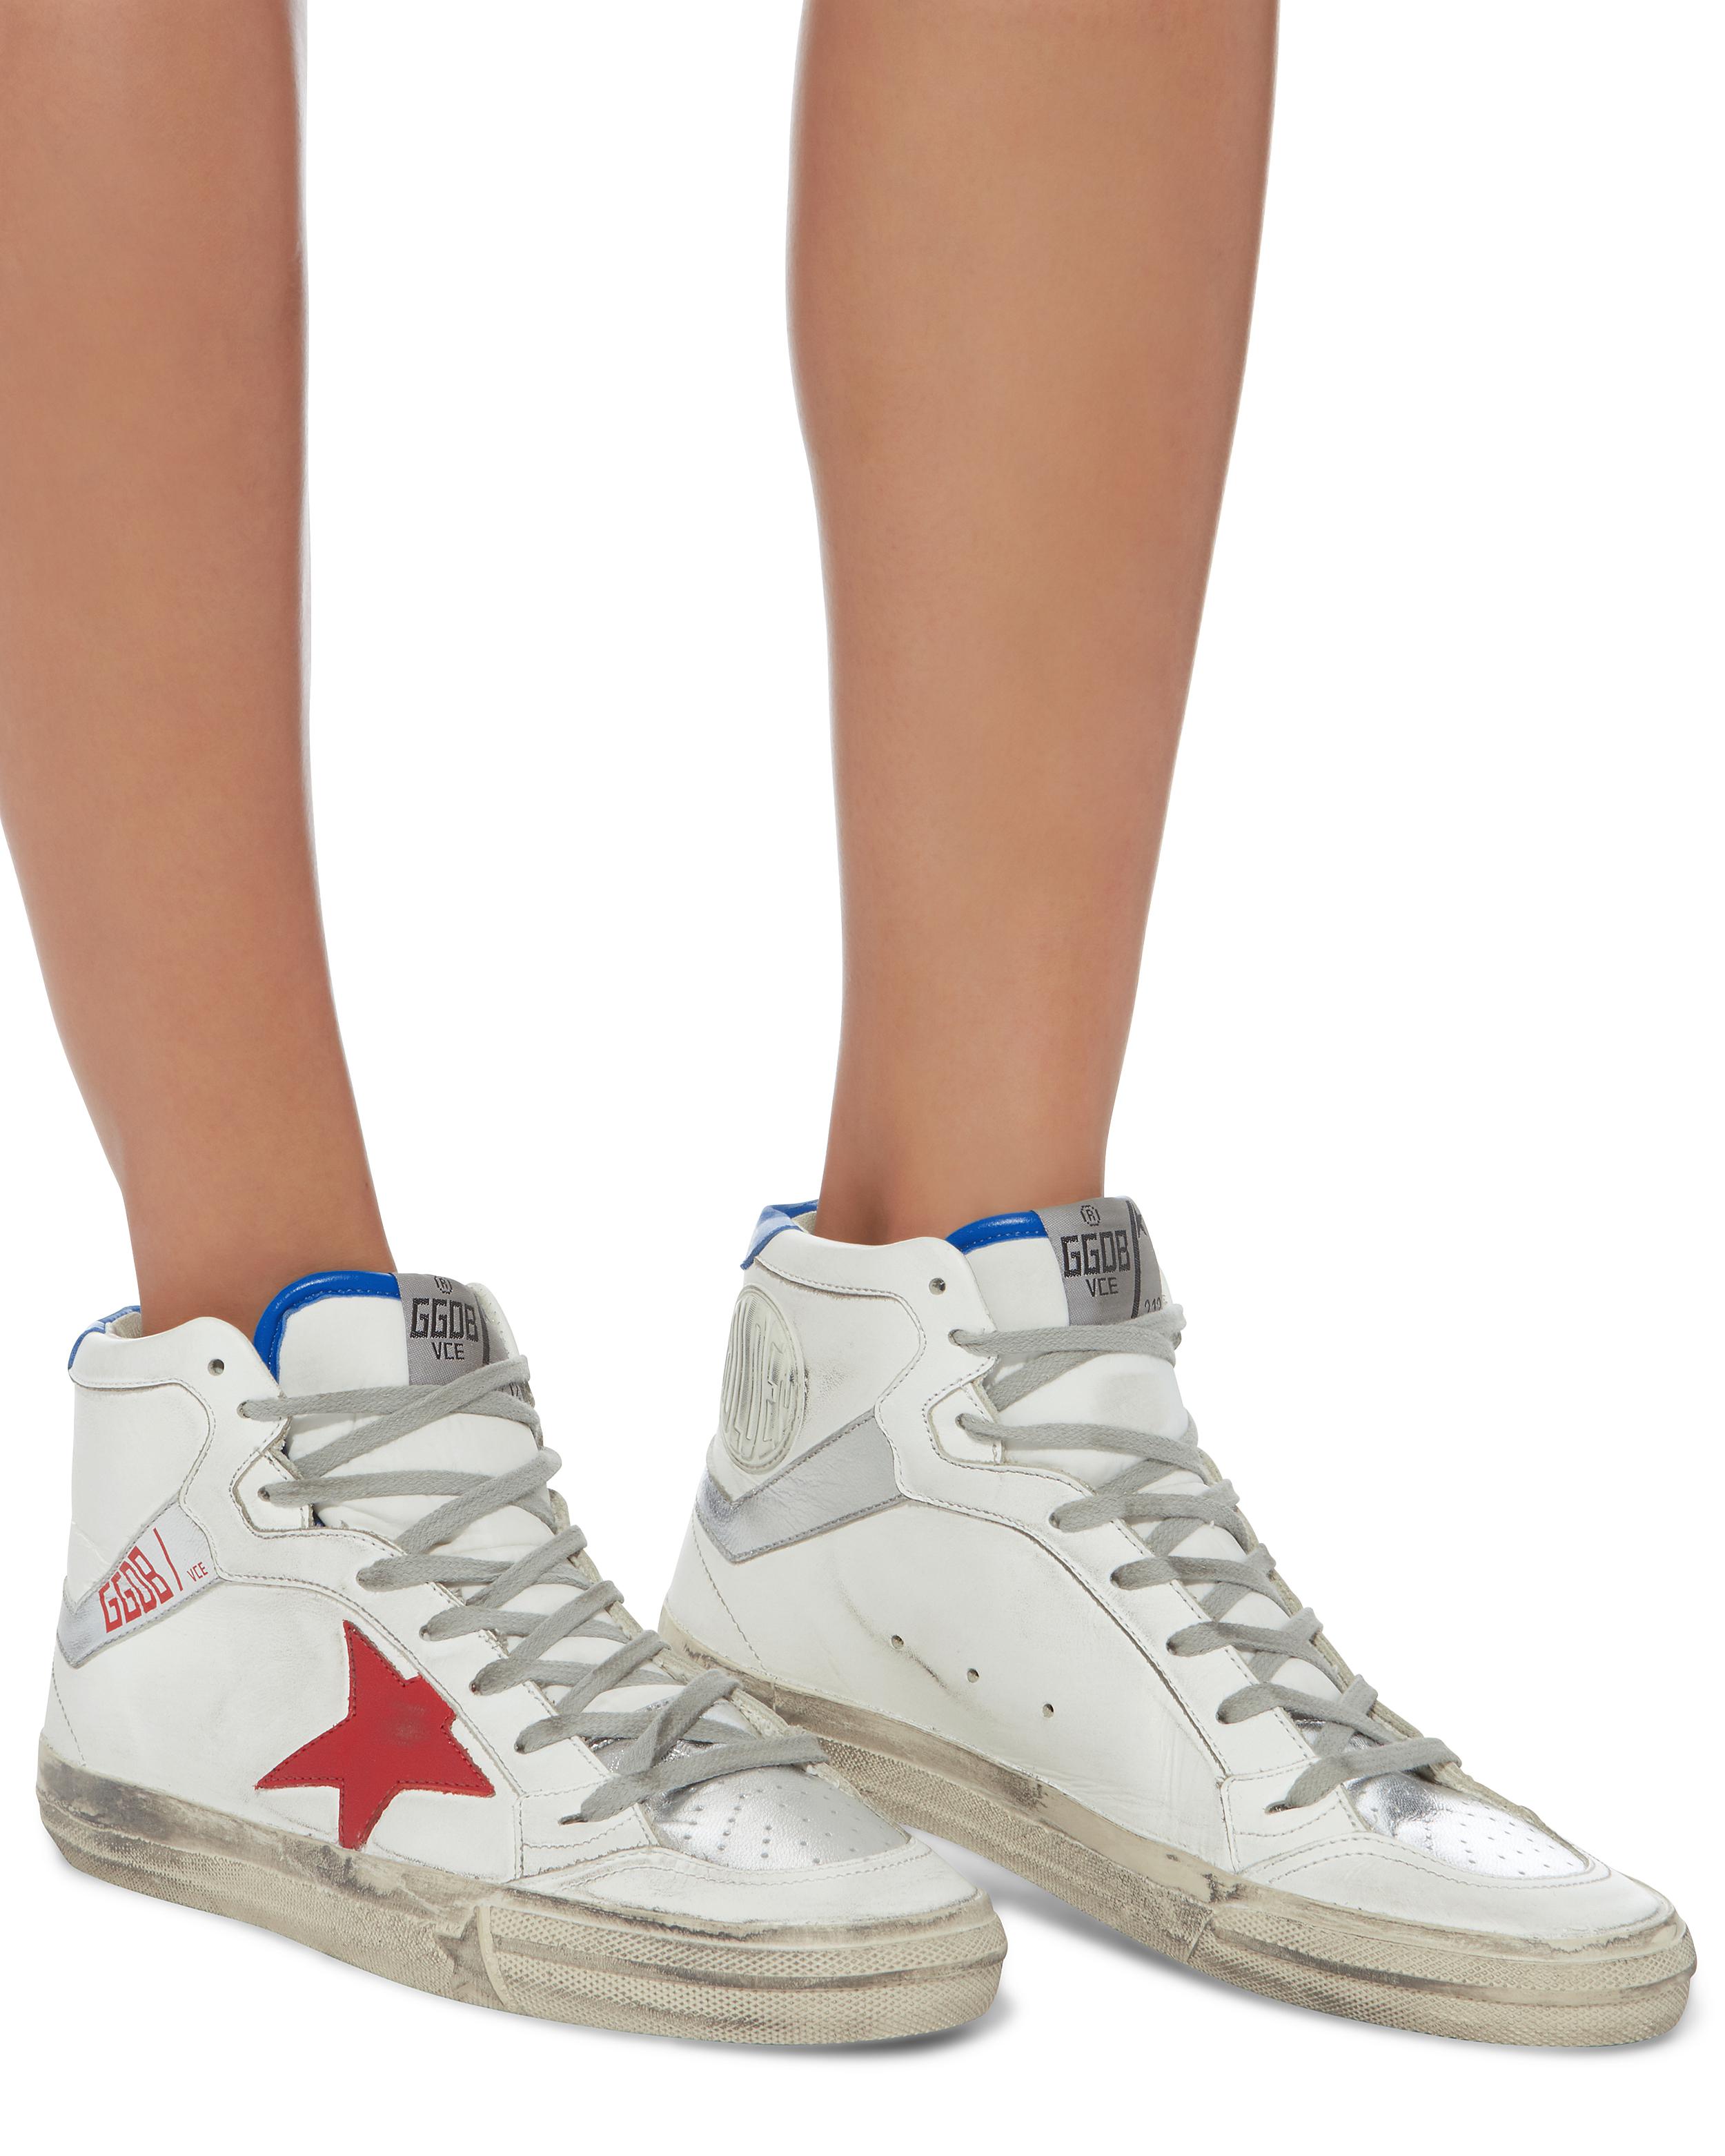 Golden Goose Deluxe Brand Goose 2.12 High-top Red Star Leather Sneakers ...